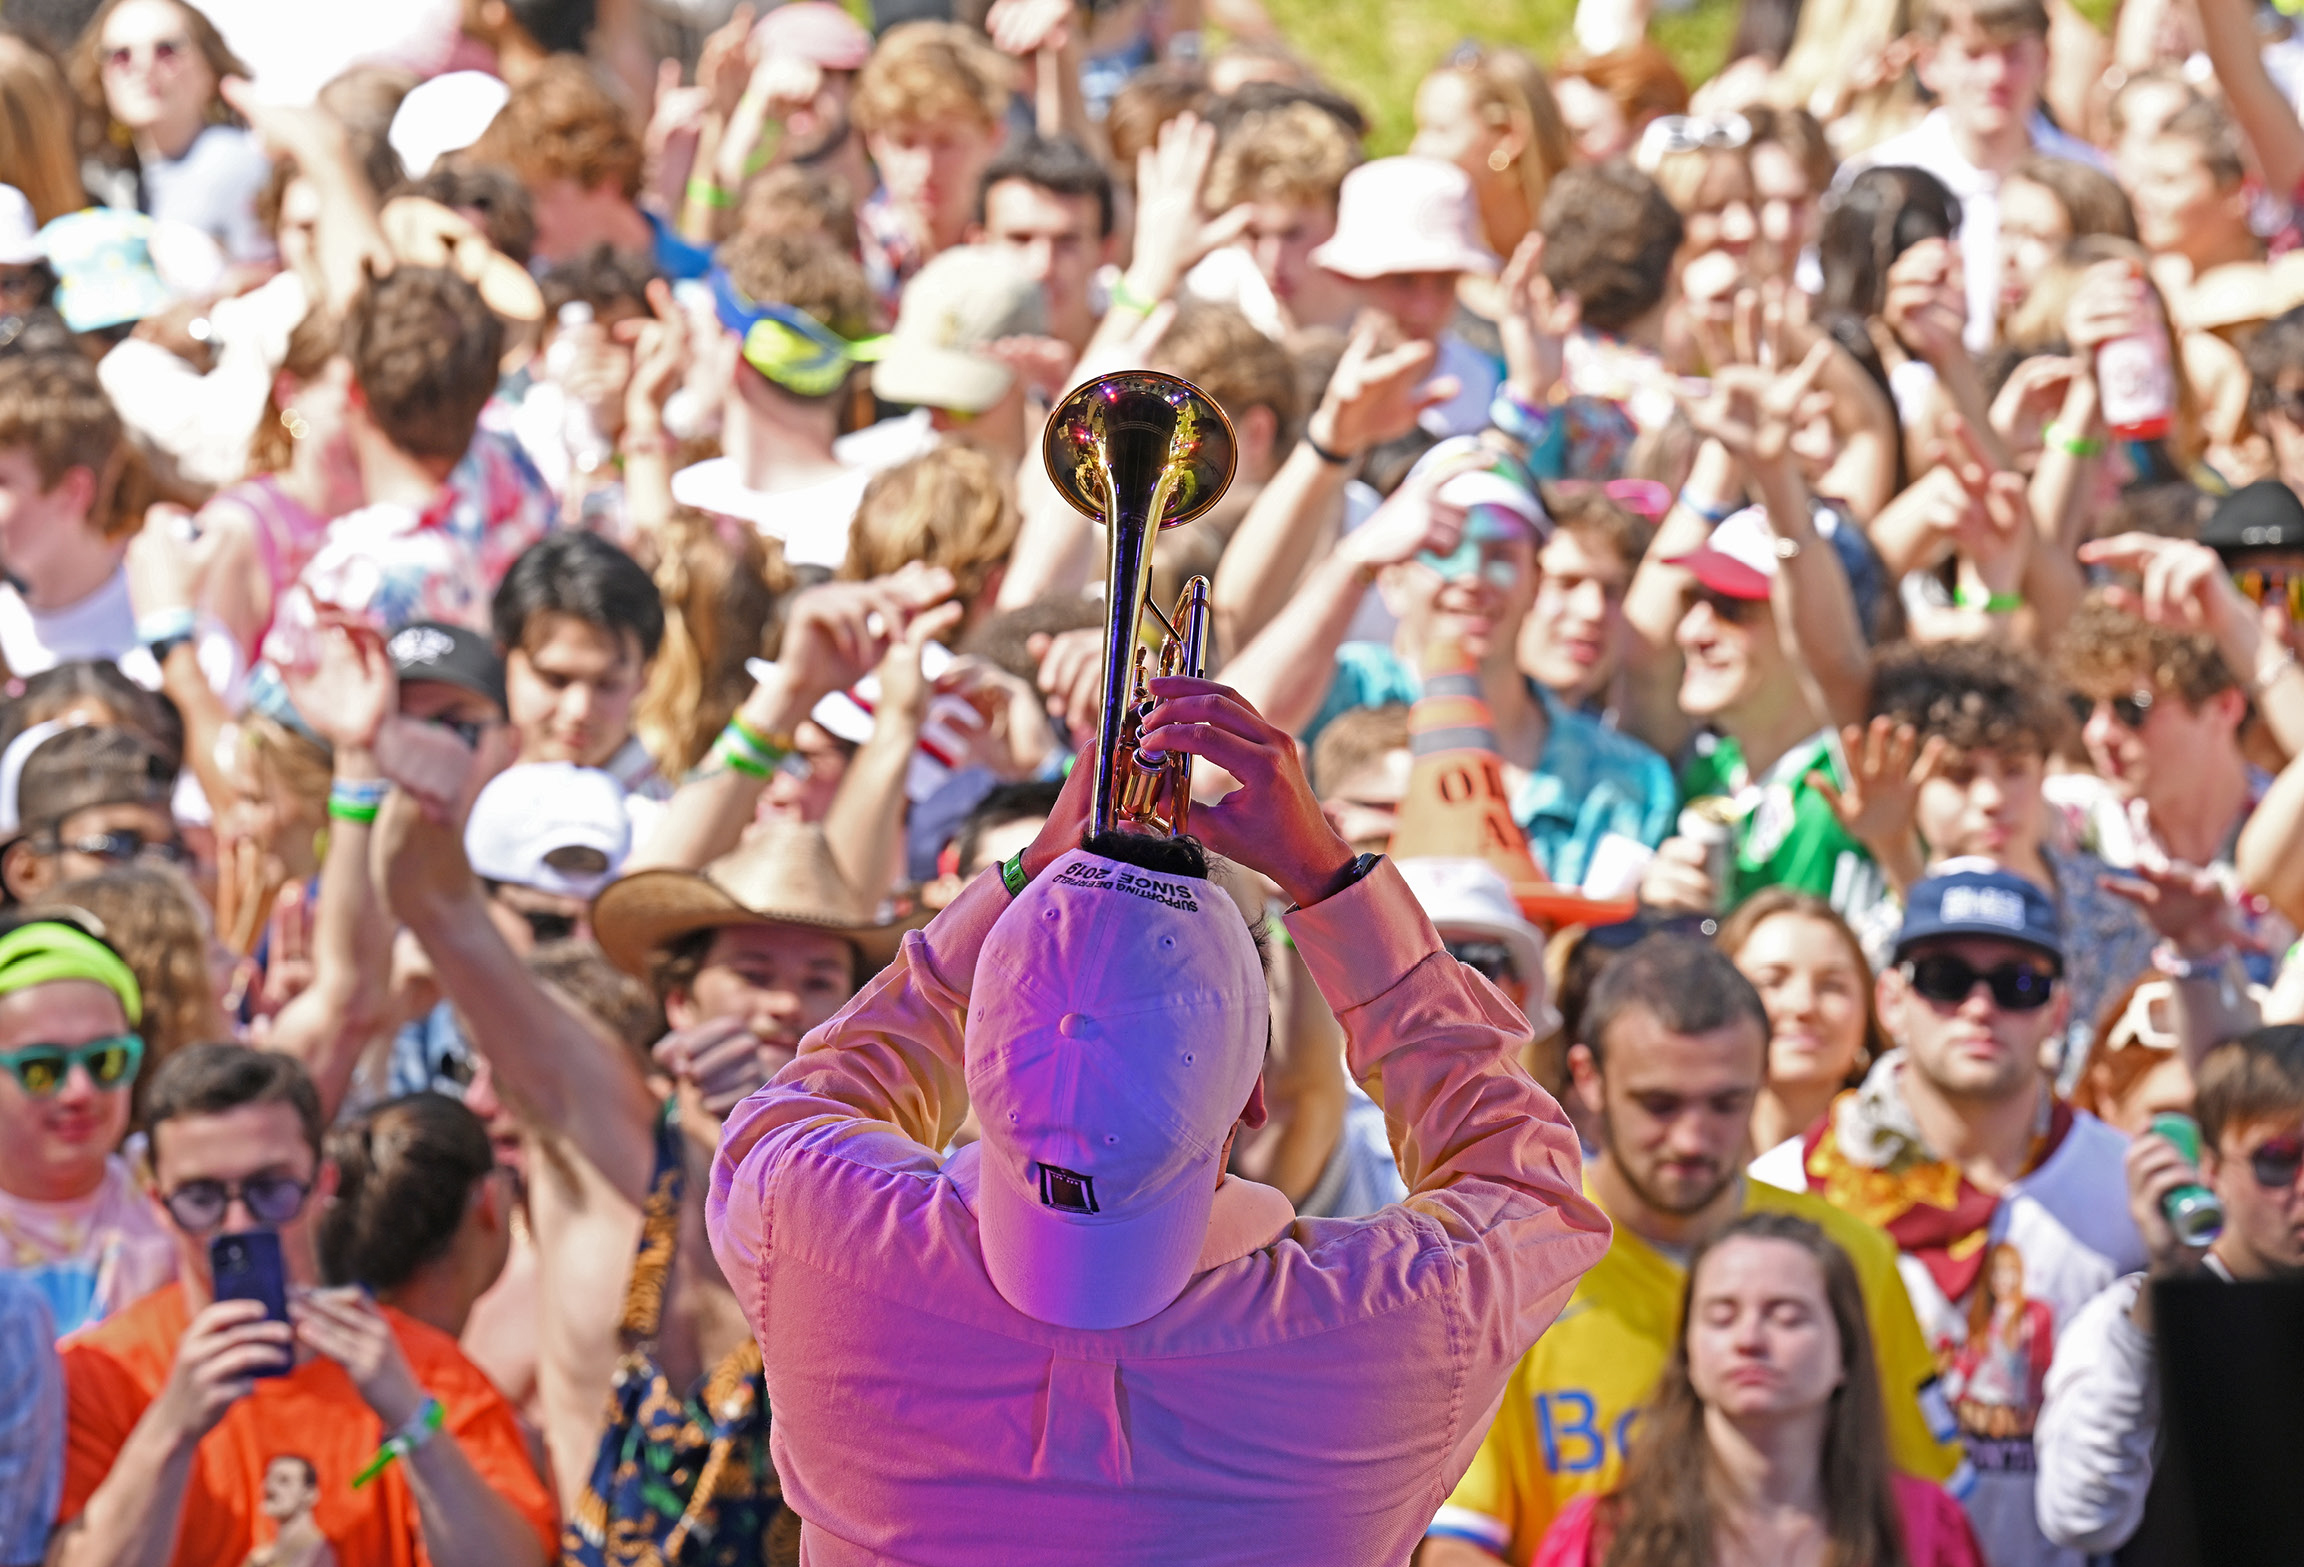 A musician blows a trumpet at Floralia in front of a crowd.